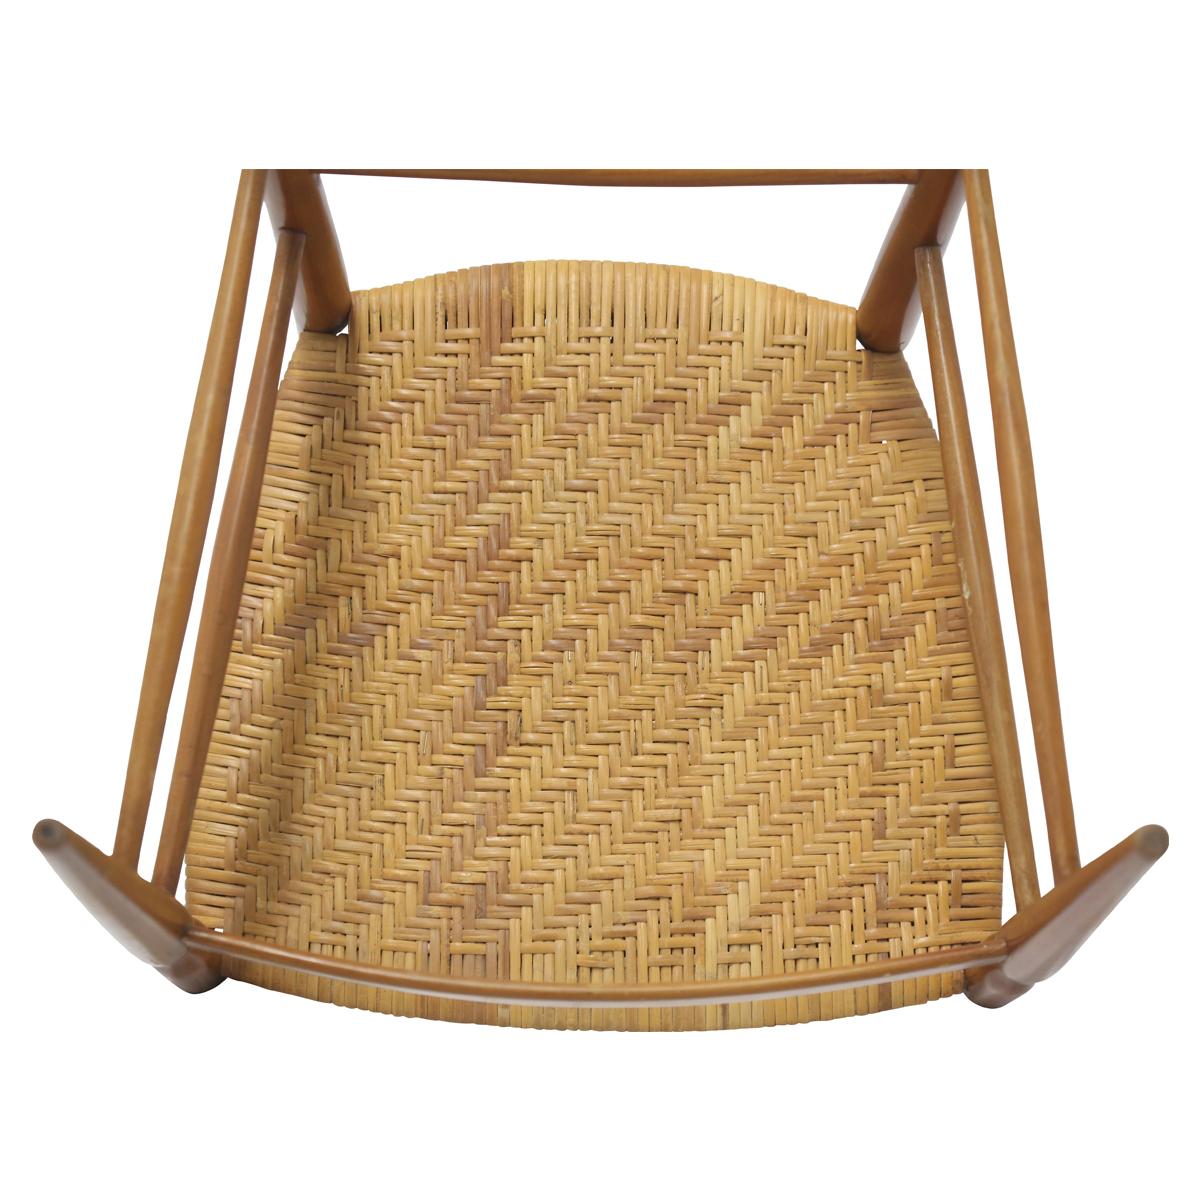 Pair of Ladder Back Chairs with Woven Rattan Seats in the Manner of Gio Ponti 1